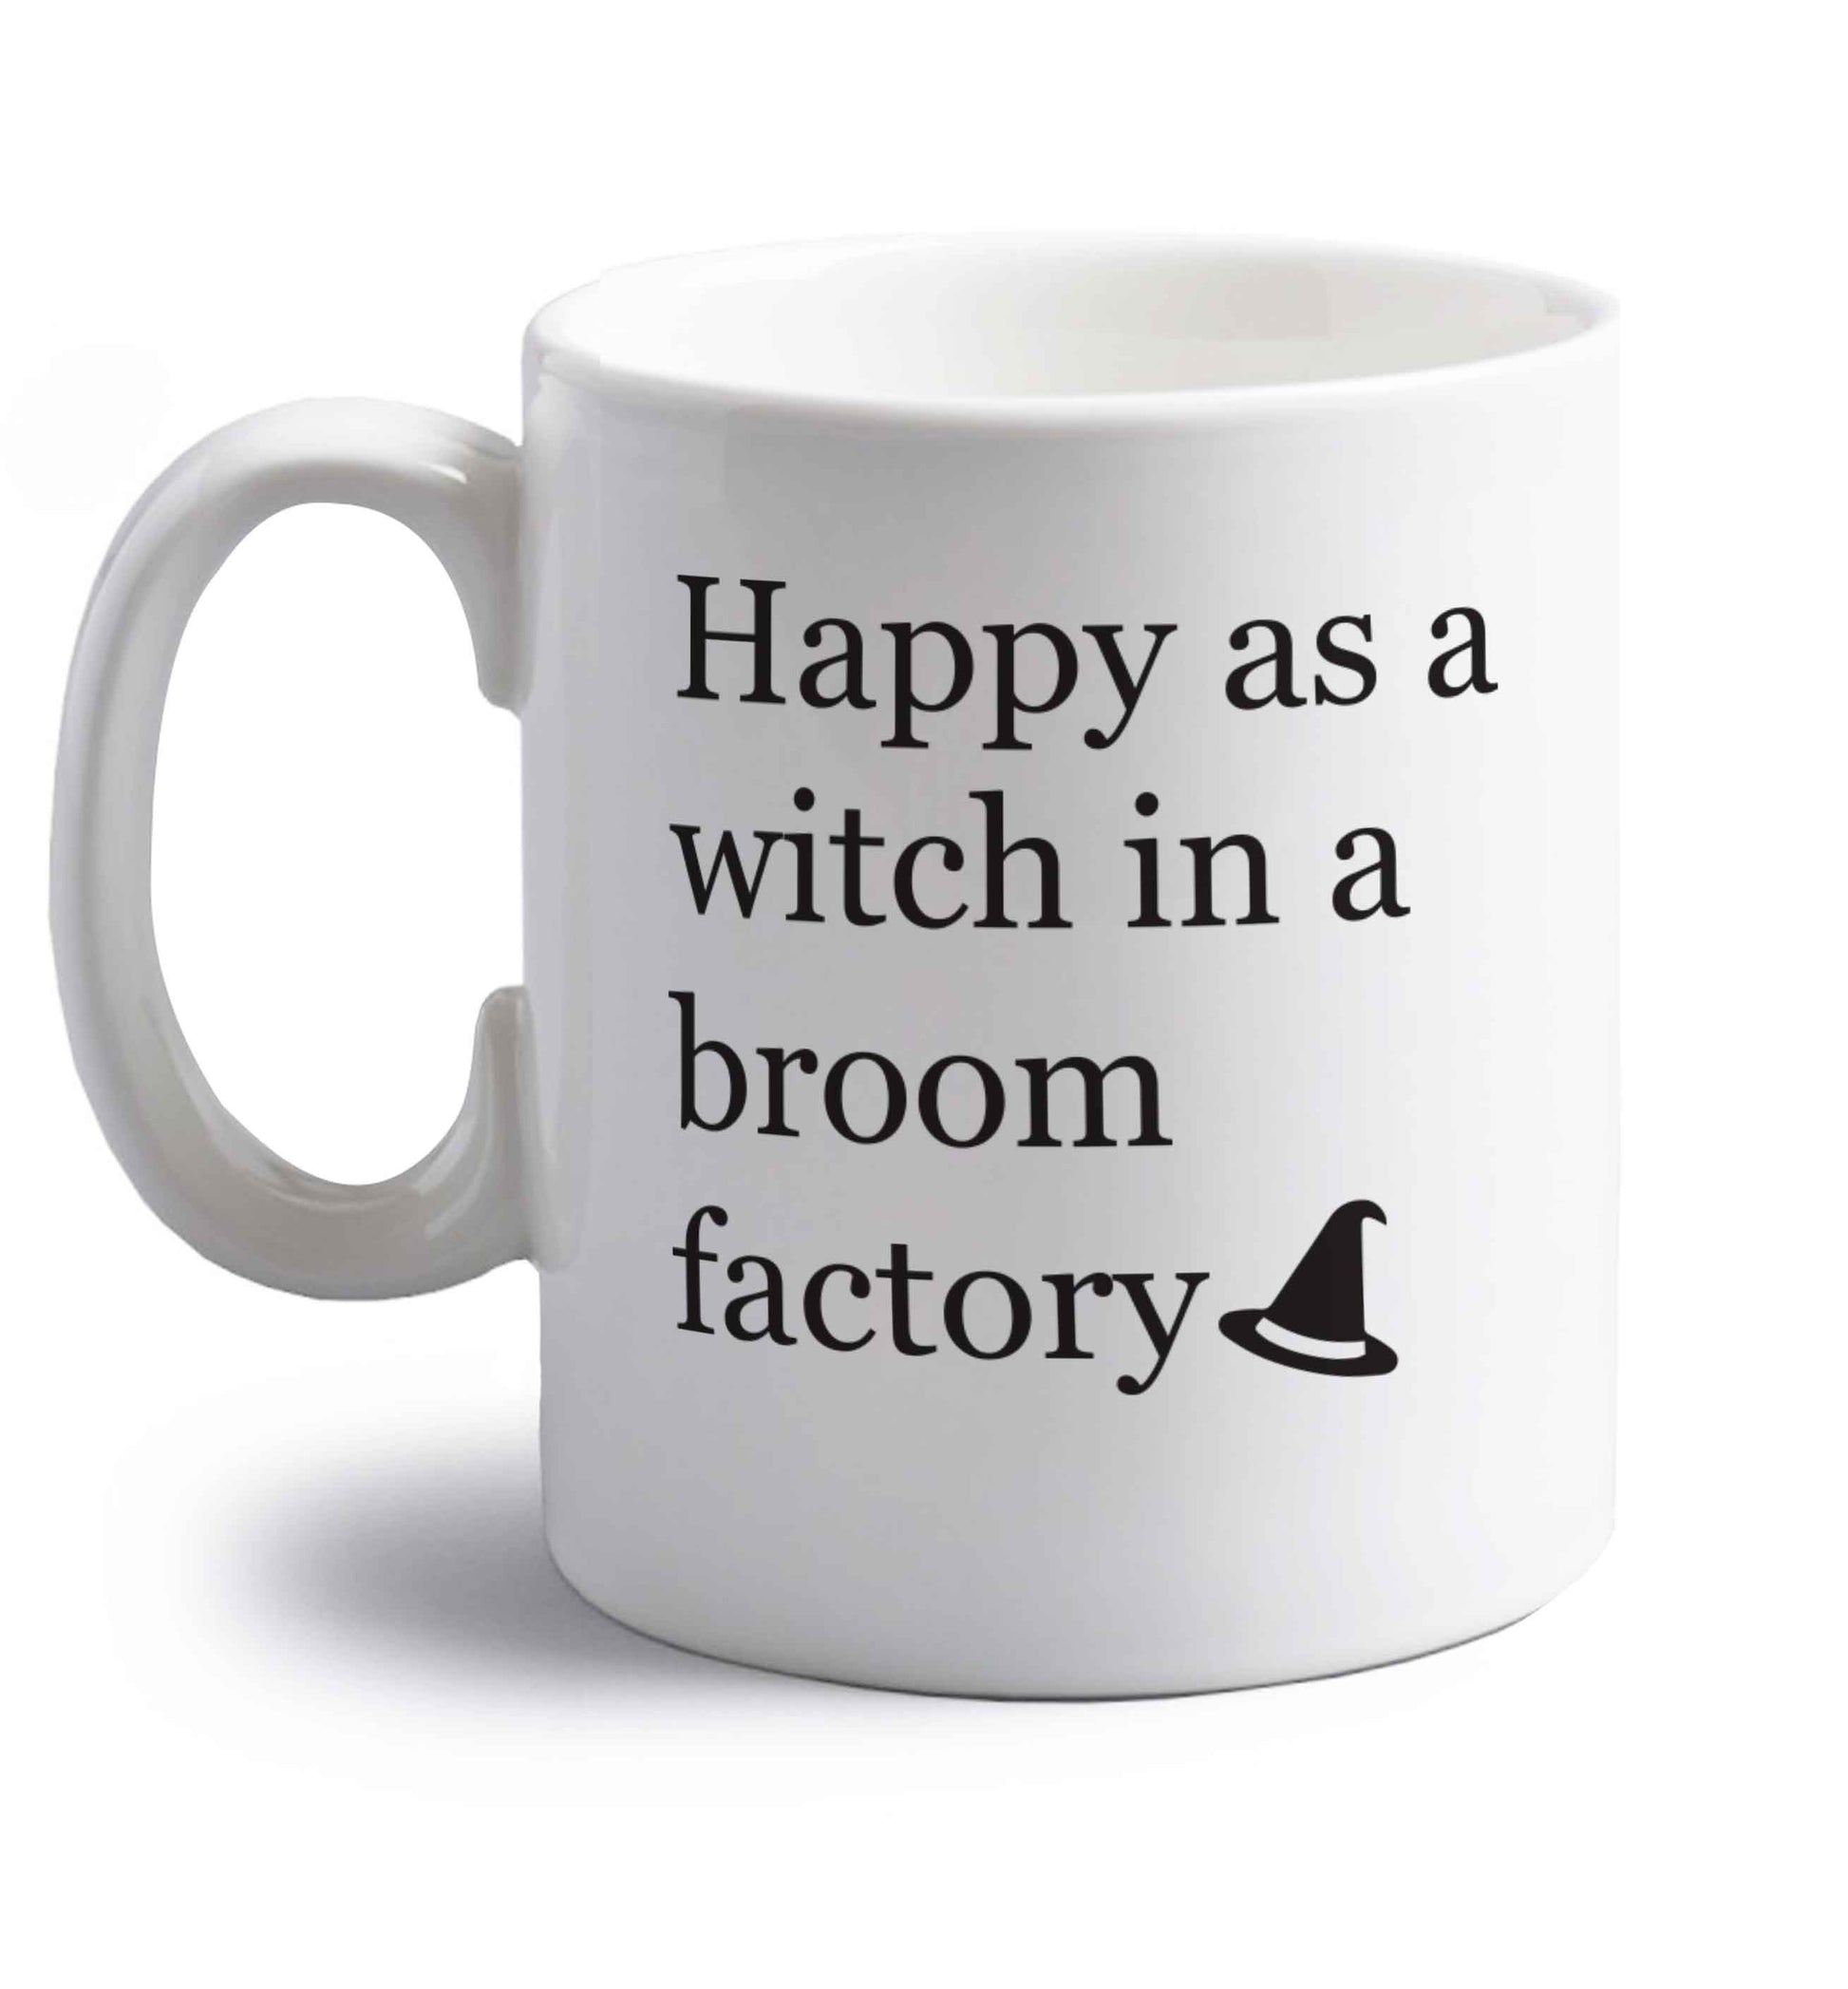 Happy as a witch in a broom factory right handed white ceramic mug 